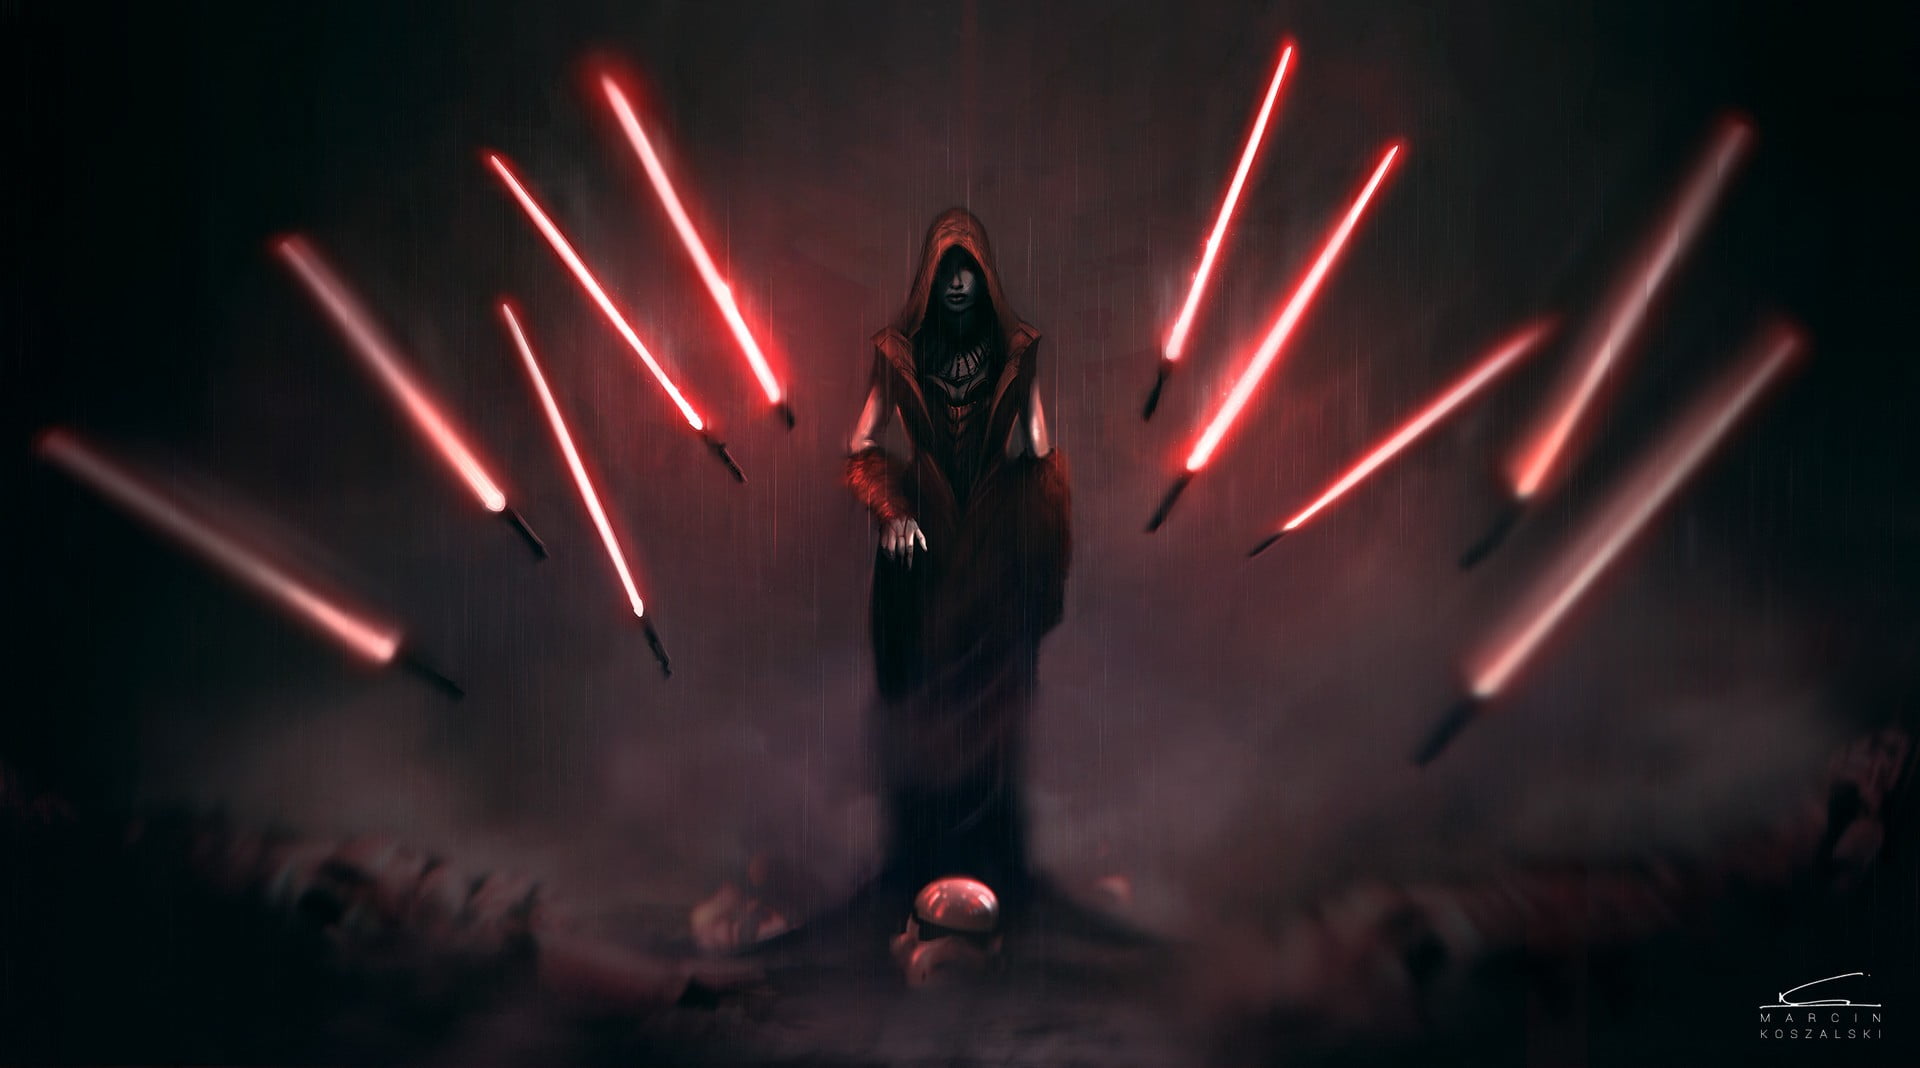 Sith Lord with hood controlling red lightsabers